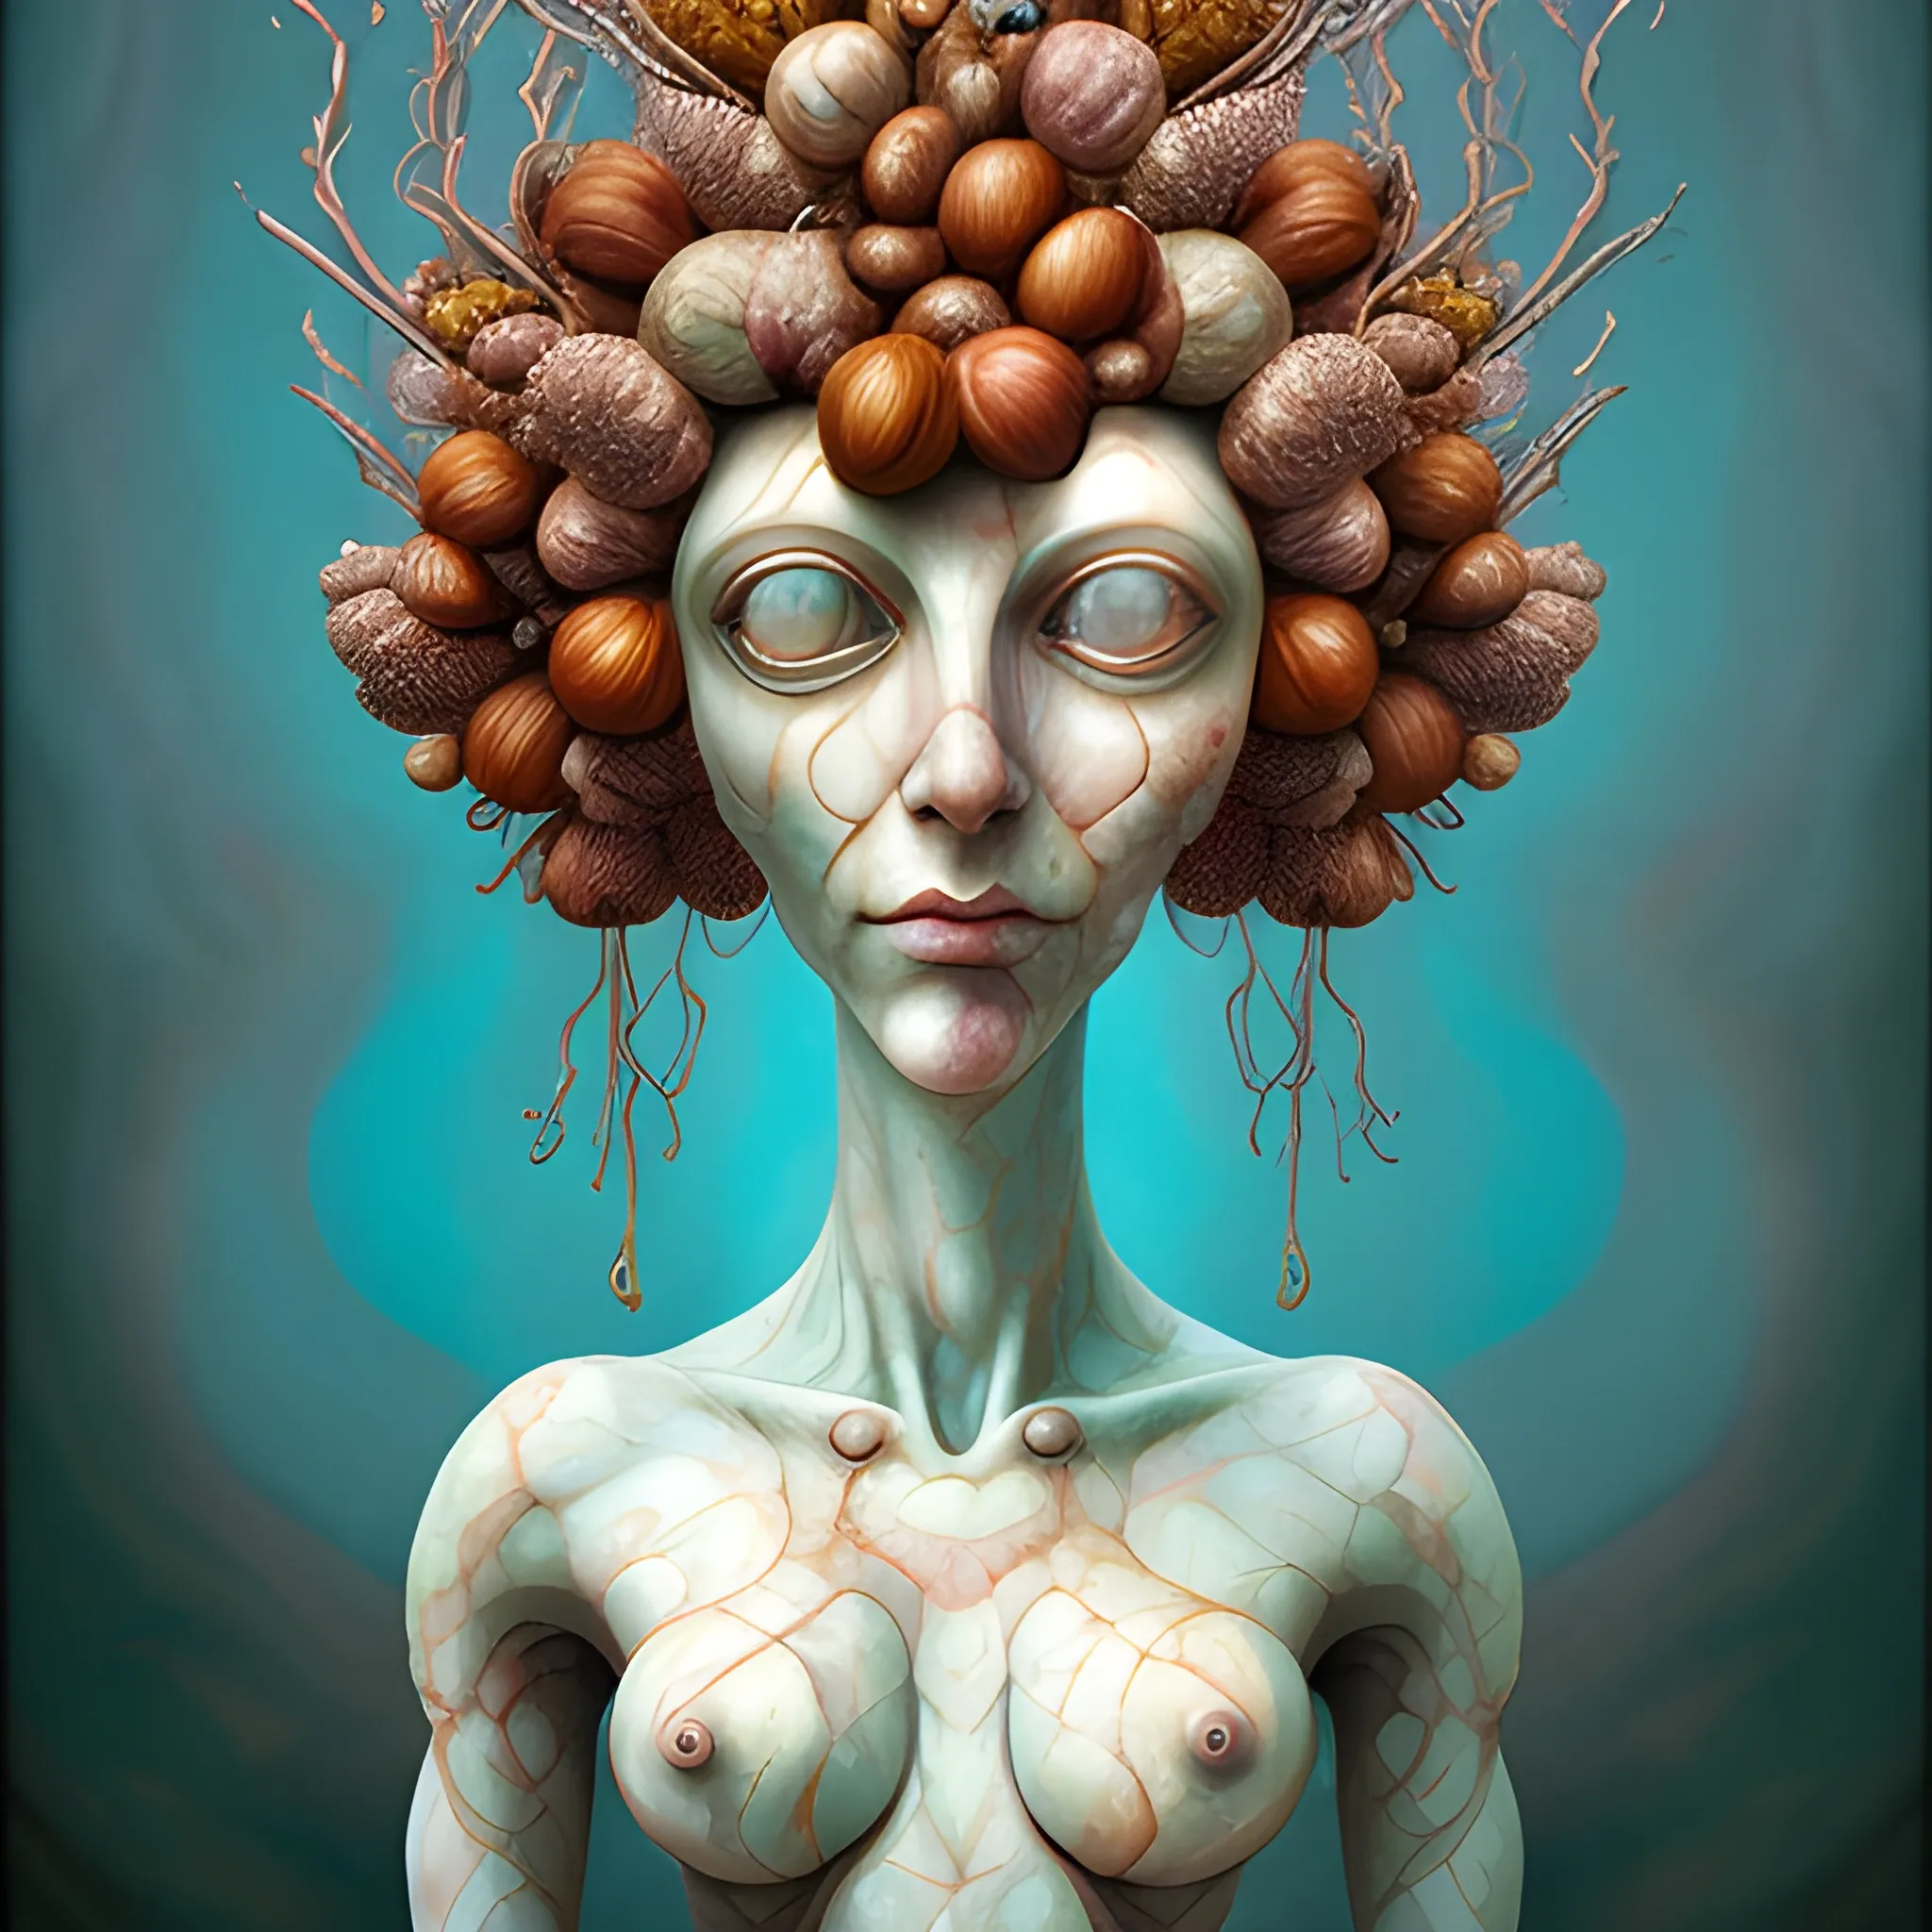  a marble statue of many crazy chestnuts look like female human face , close up, saturated colors, surrealism, chaotic background many chestnuts and chestnut leaves floating around  3D, Trippy, eerie atmosphere, close up, illustration, angular perspective, Oil Painting, Water Color